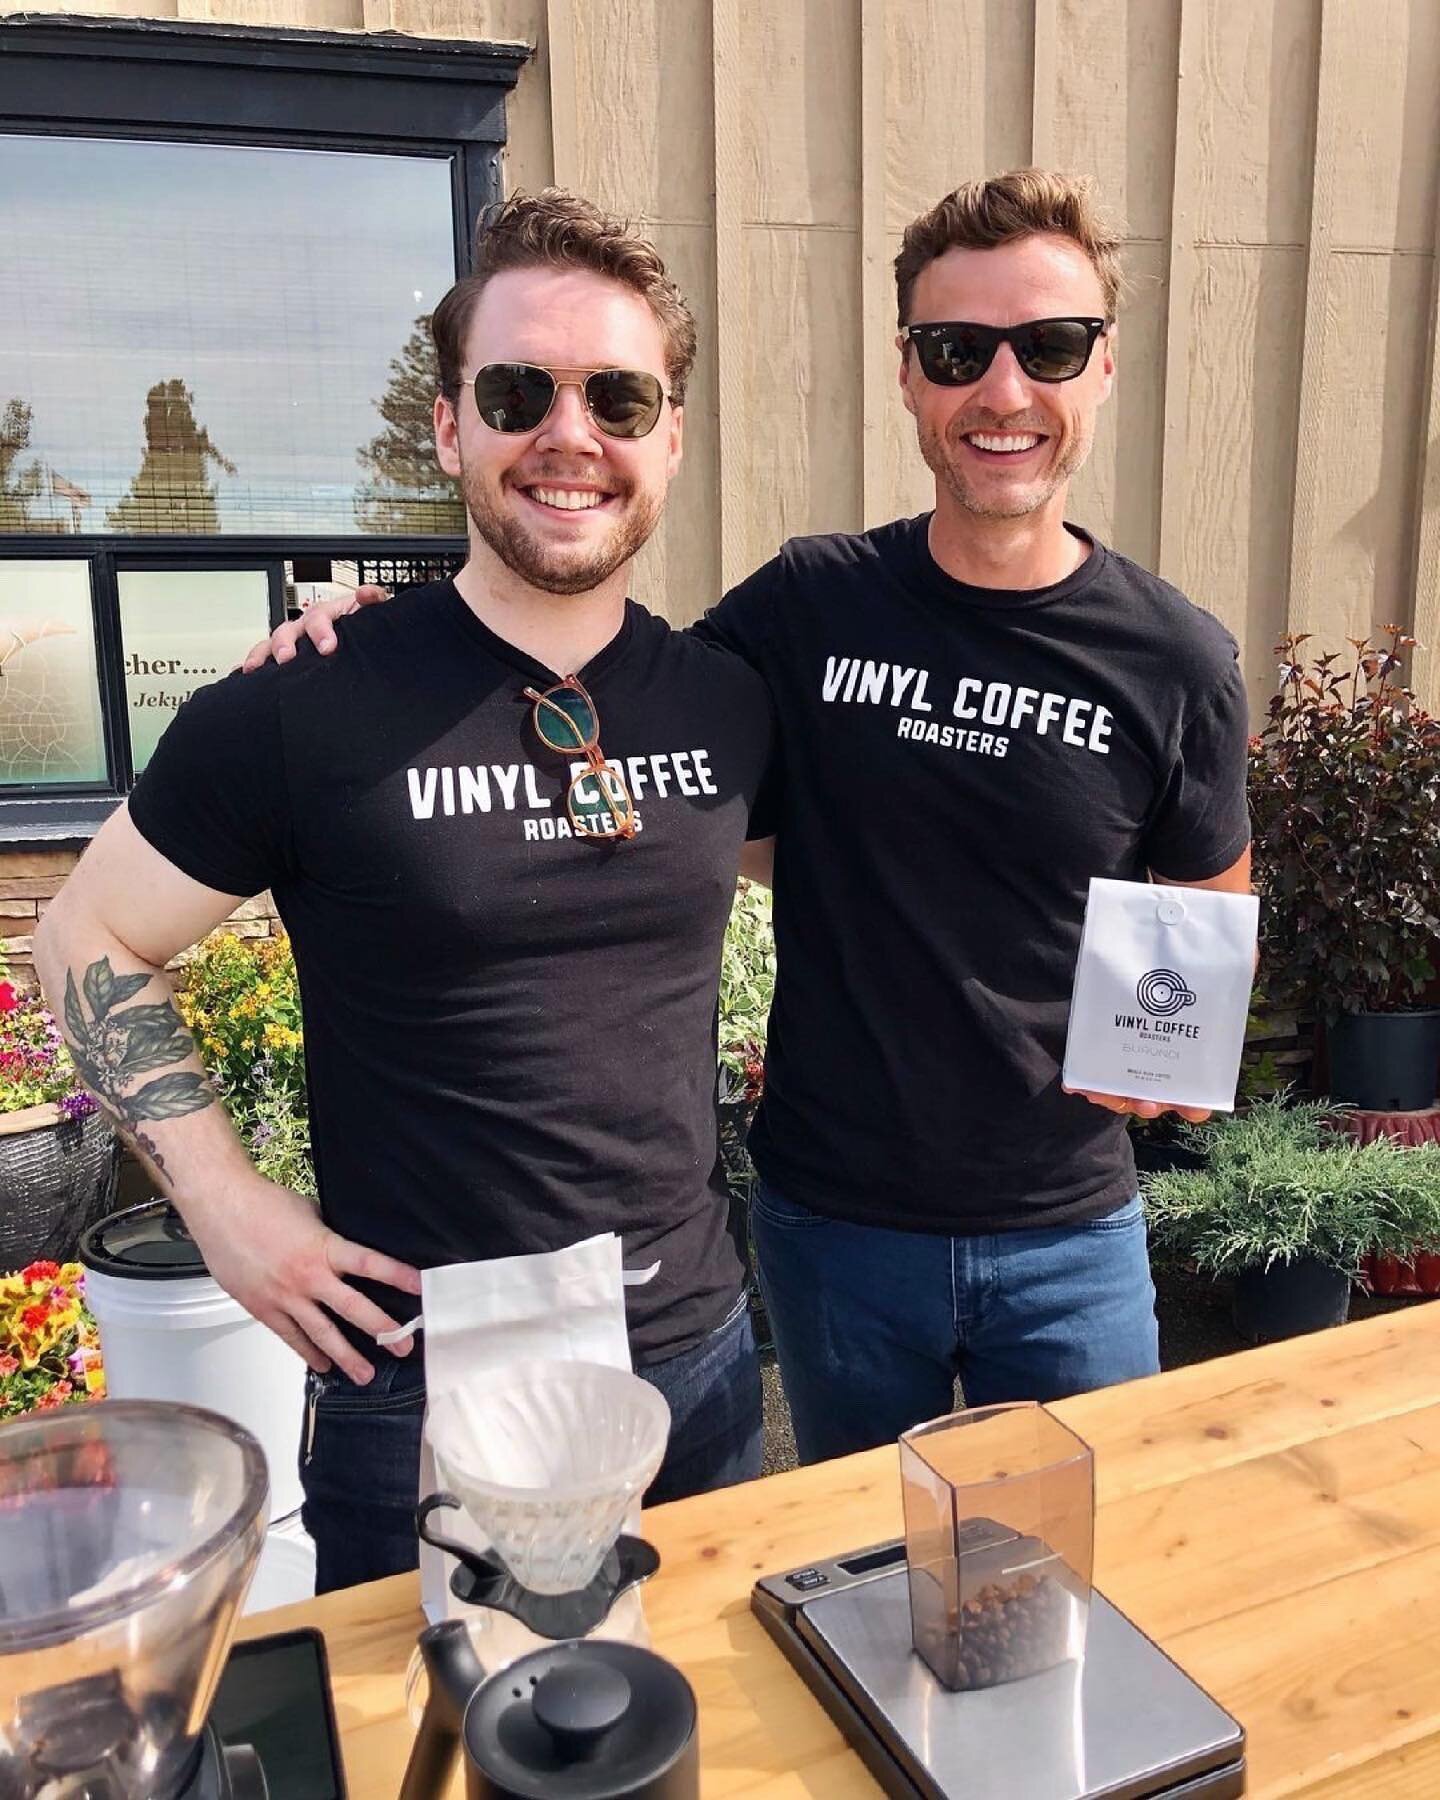 Exactly 2 years ago, with your support on Black Coffee Friday, we launched Vinyl Coffee Roasters! A journey that has taken us for a ride&hellip;

&bull; From popups in front of small businesses, to coffee tastings at Vinyl HQ. 

&bull; From a 1 kilog